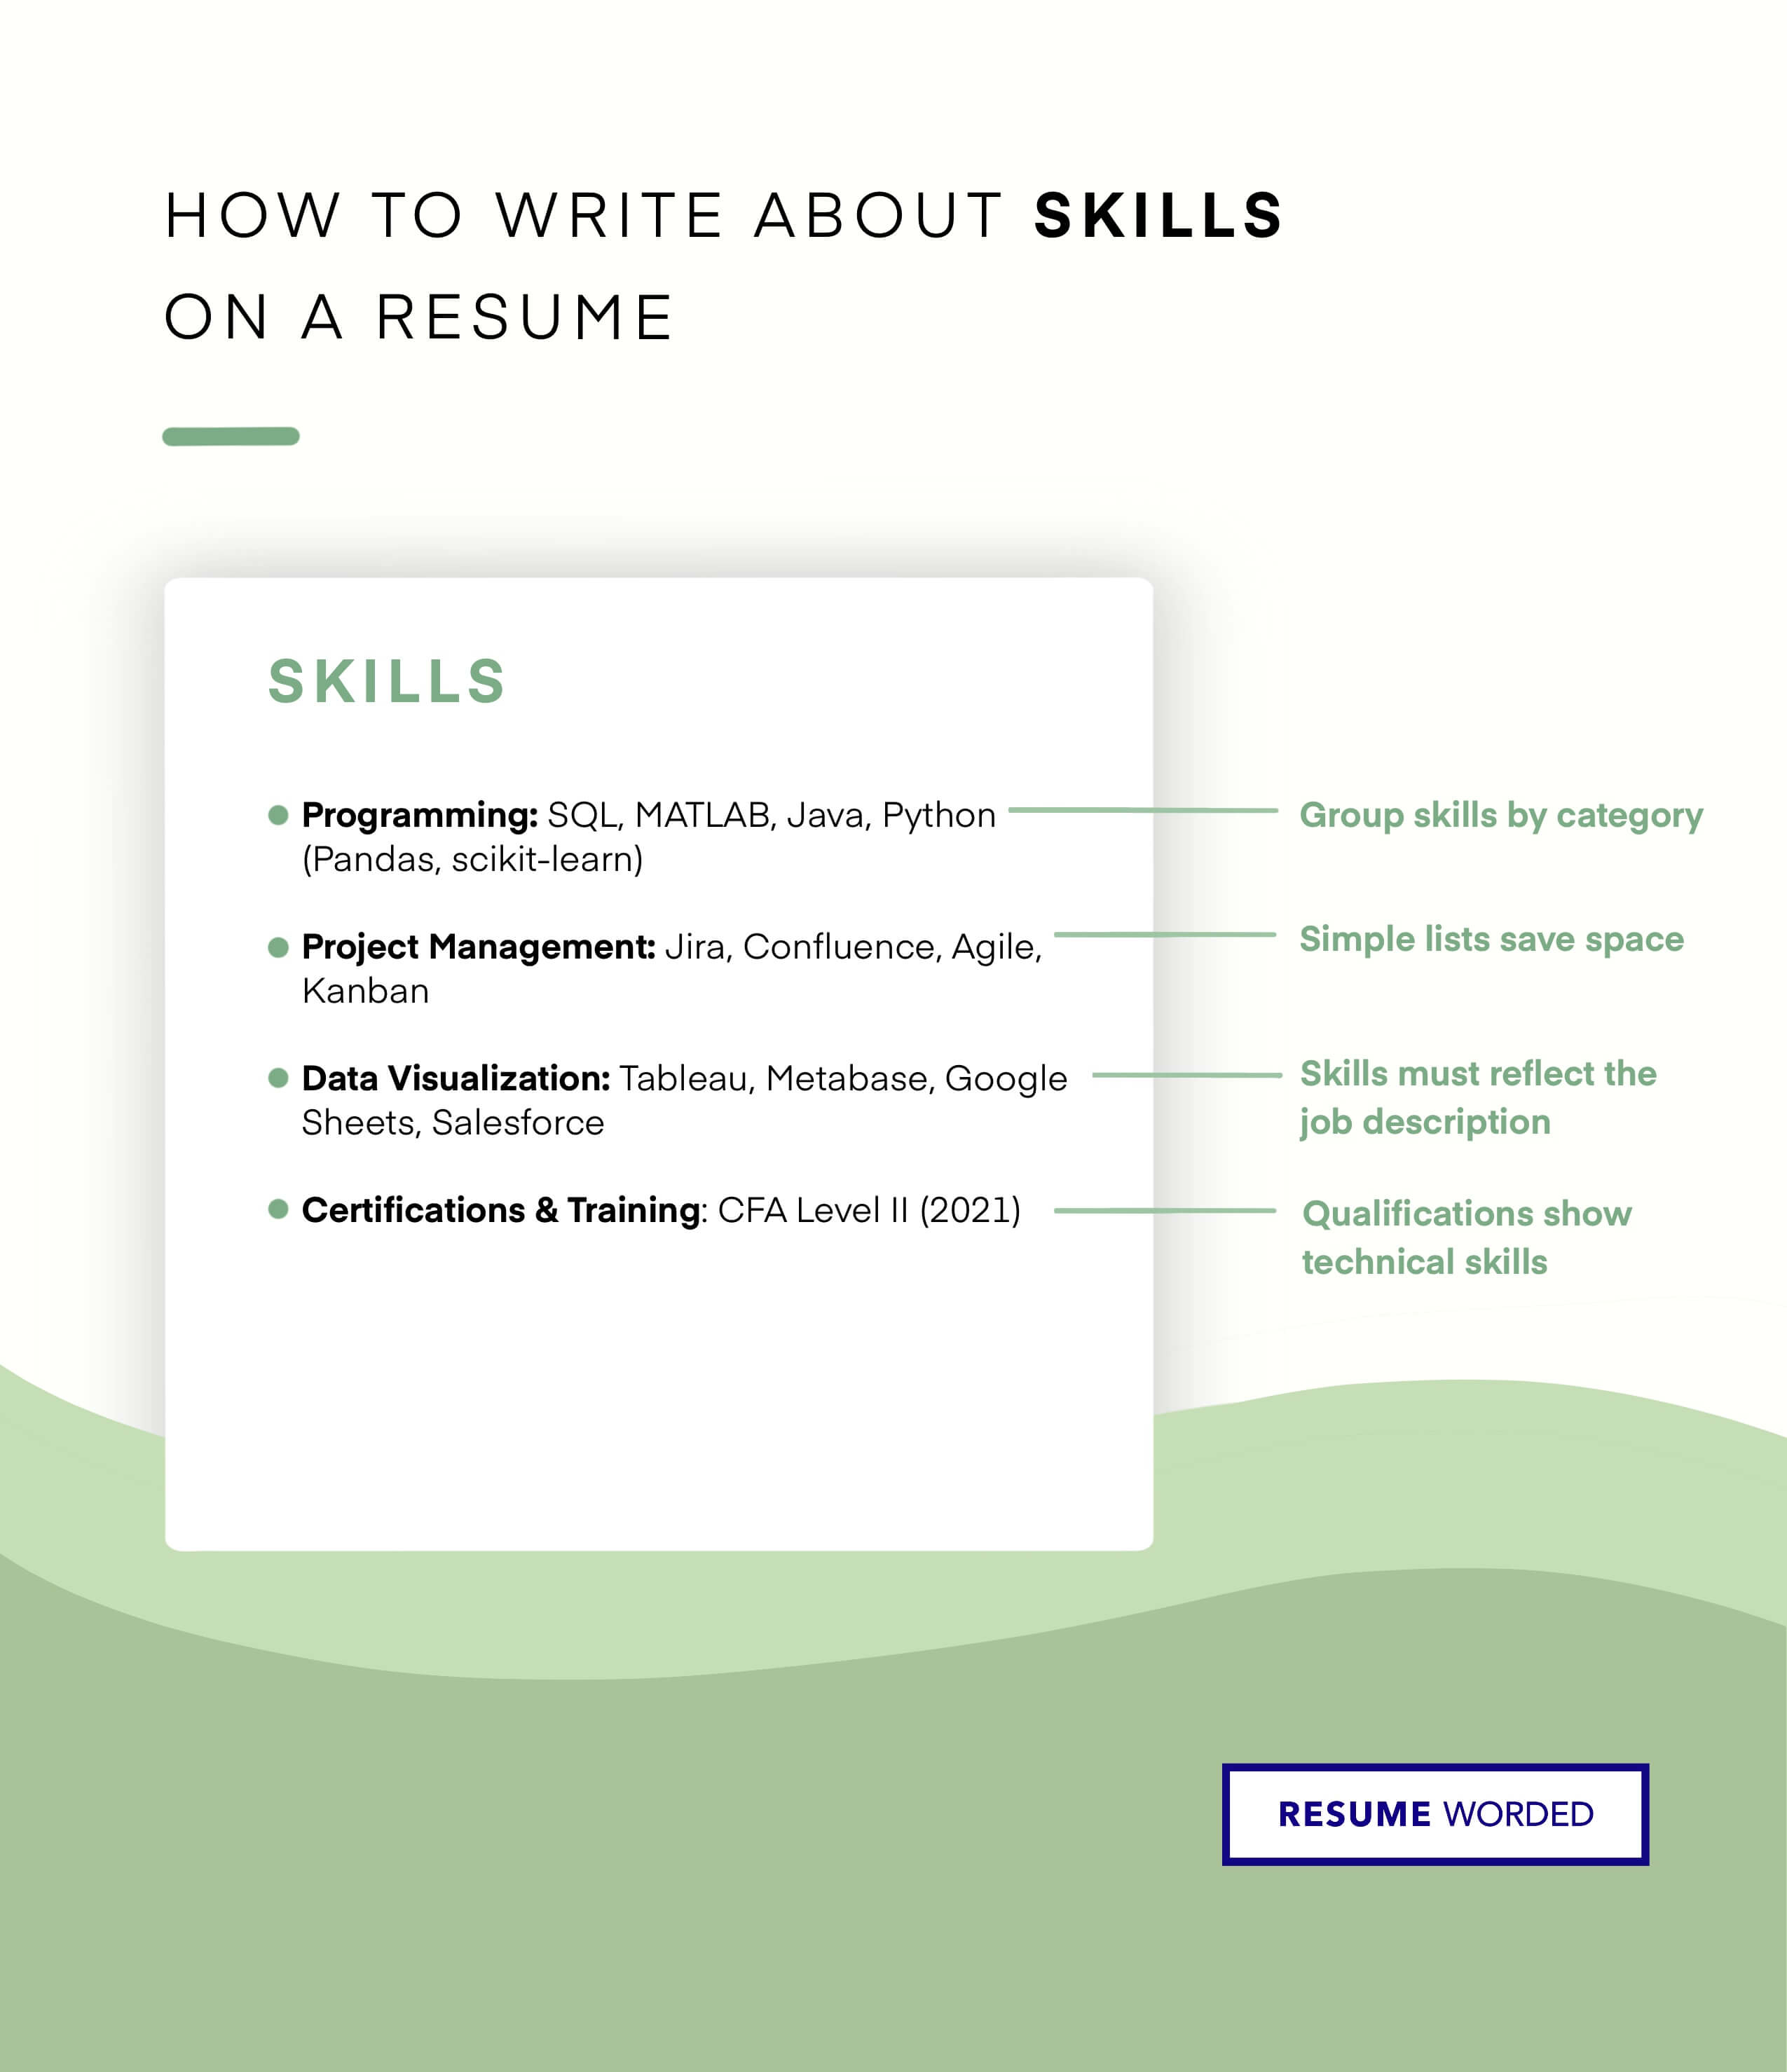 Show your people skills - Life Insurance Agent CV